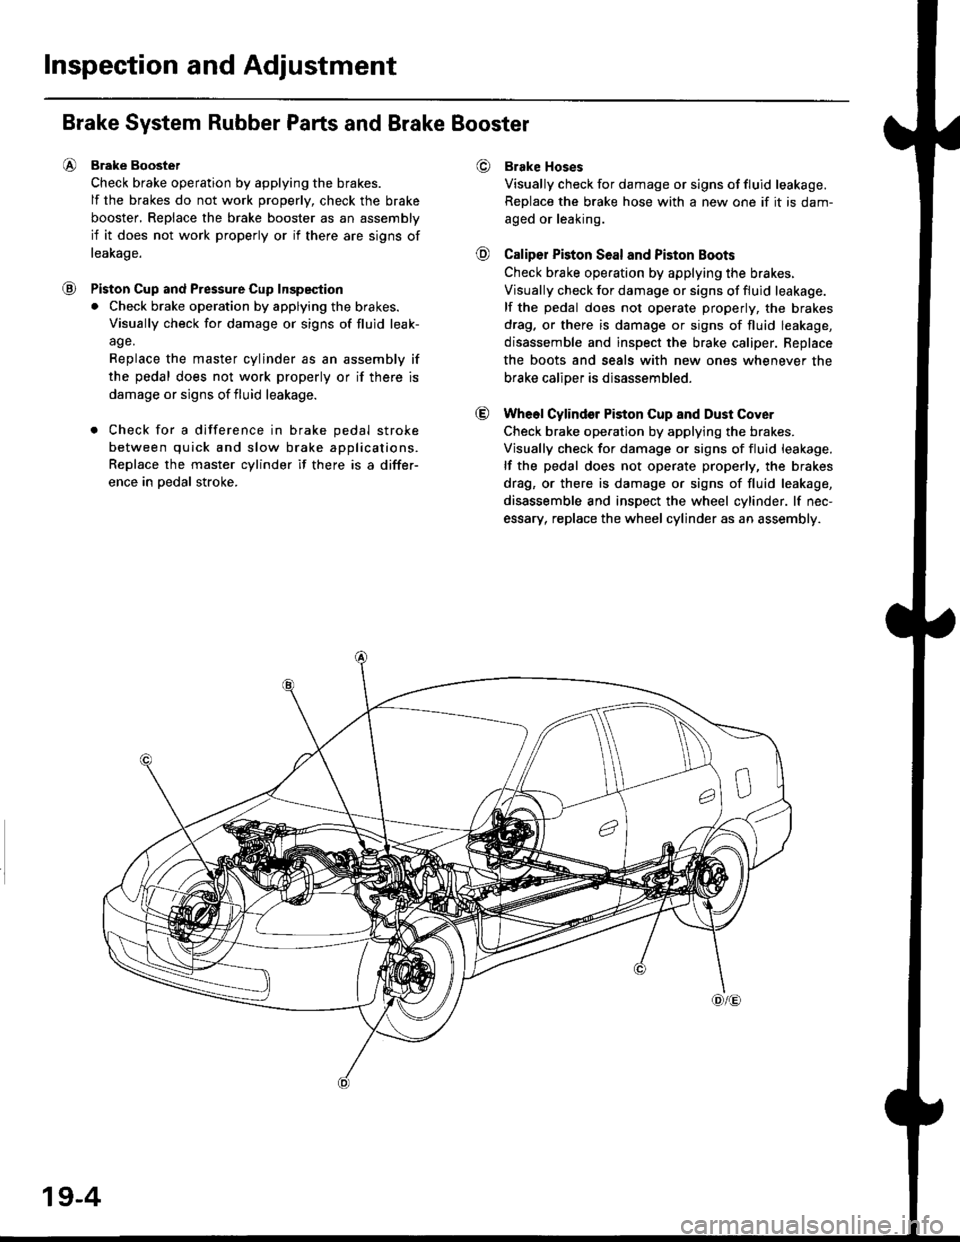 HONDA CIVIC 2000 6.G Workshop Manual Inspection and Adjustment
€)
@
@
@
Brake System Rubber Parts and Brake Booster
Brake Boostet
Check brake operation by applying the brakes.
lf the brakes do not work properly, check the brake
booster